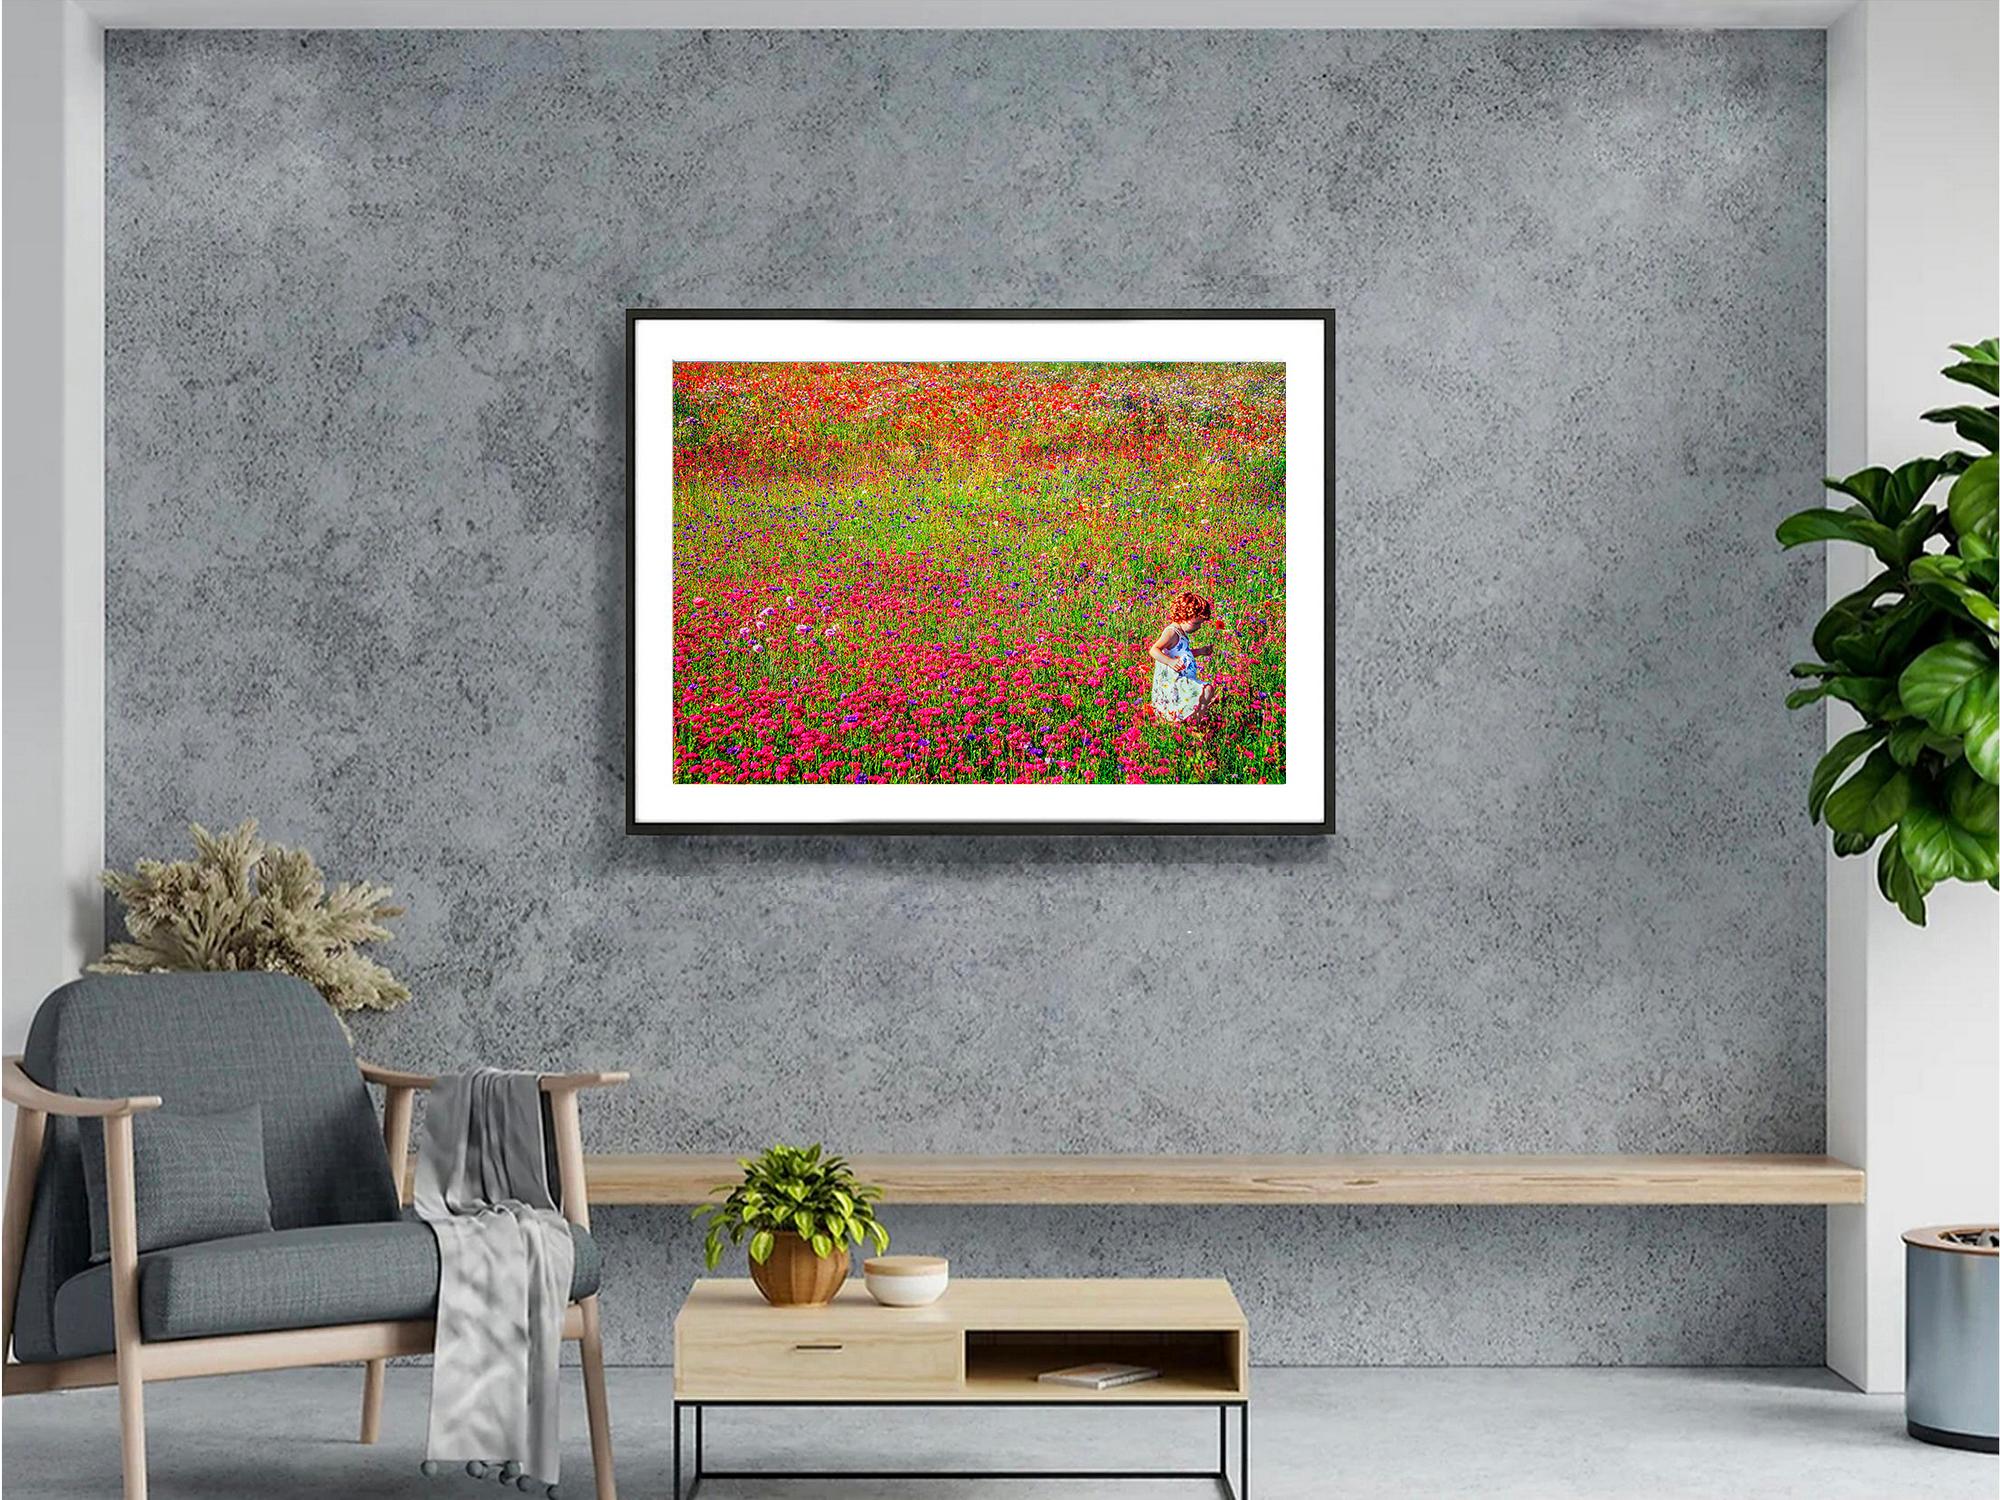  Through Mitchell Funk's lens, a field of colorful flowers in bloom turns into a Monet-like Post-Impressionist painting. A lone redhead child punctuates the composition as she prances through the blossoming flowers. The overall effect of the image